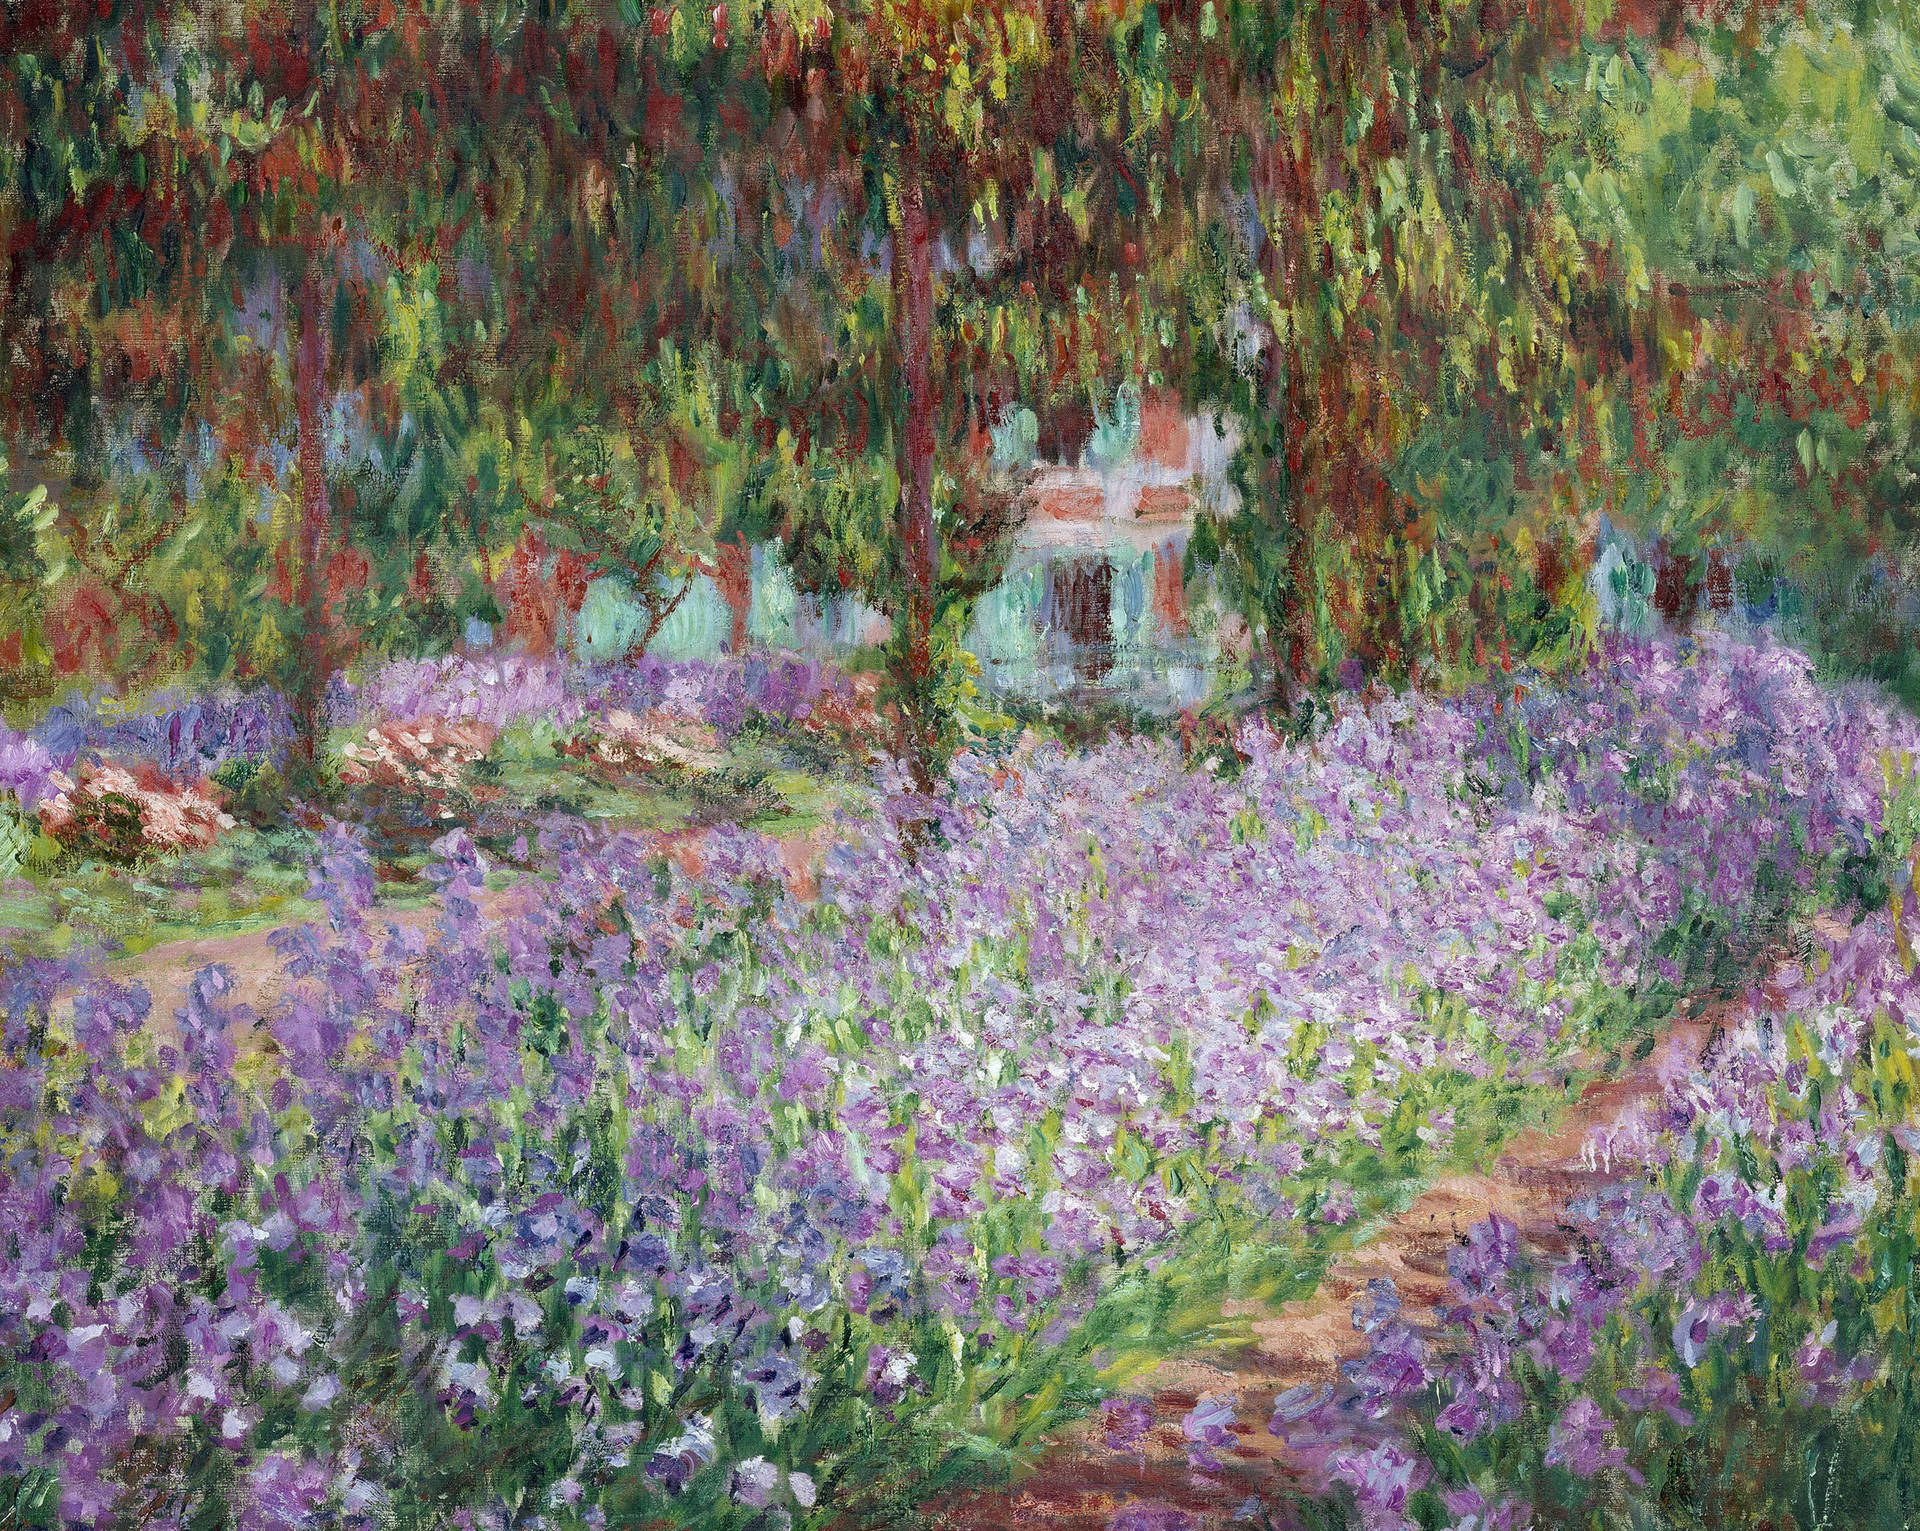 An Aesthetic Depiction Of The Artist's Garden - A Classic Impressionist Art Piece